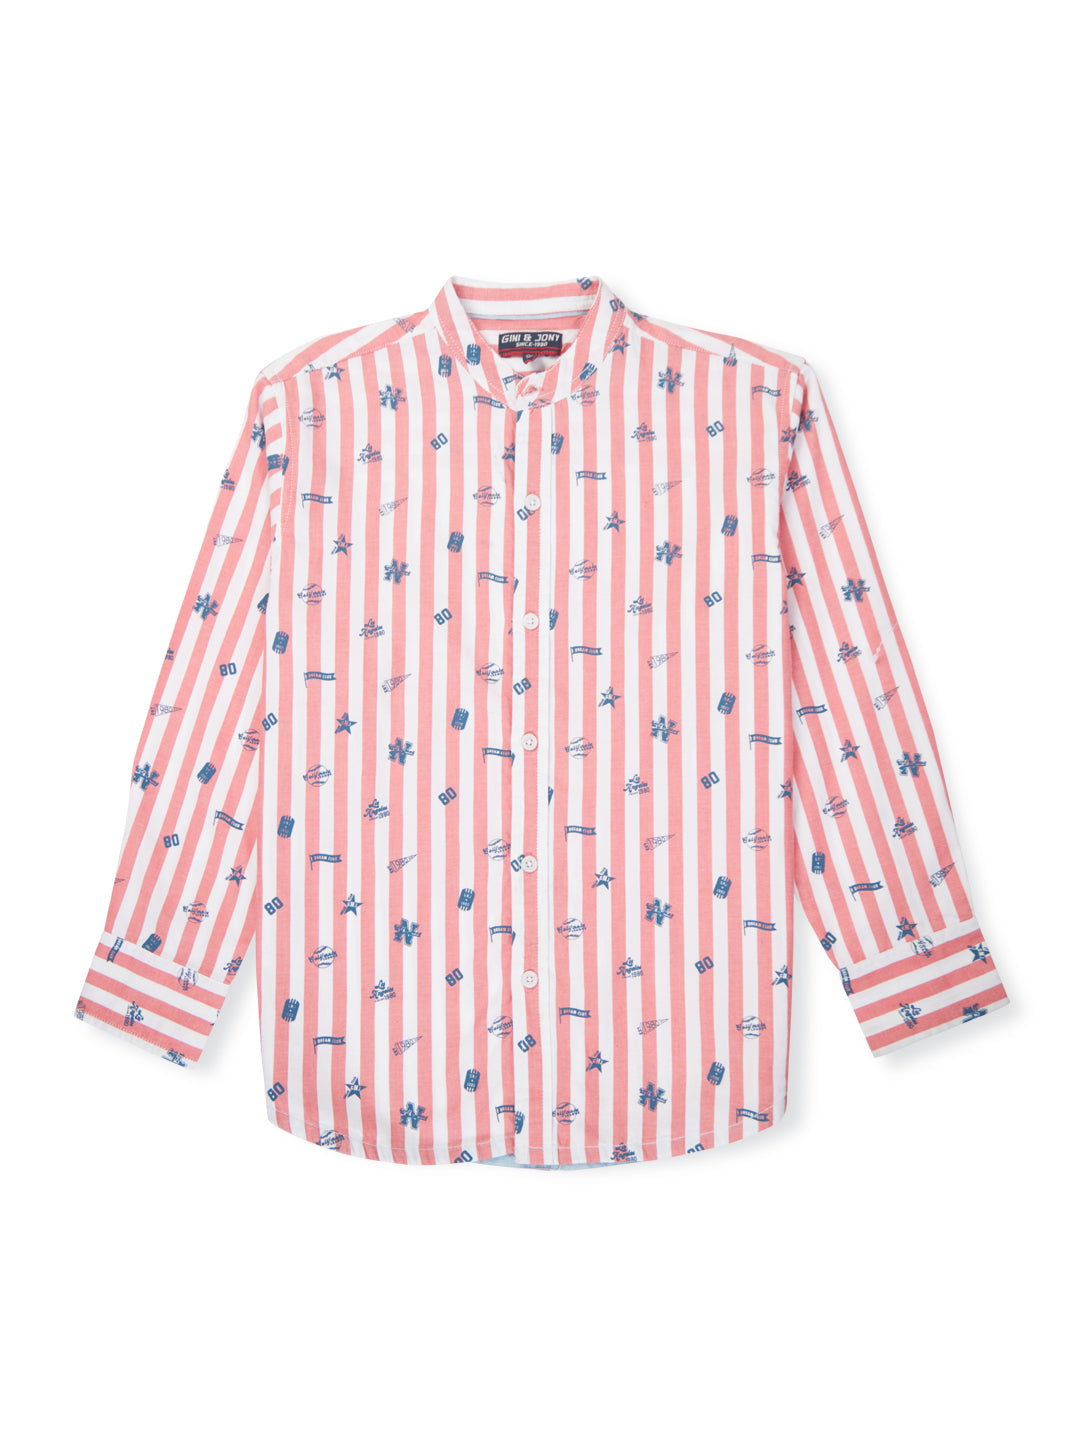 Boys Red stripe full sleeve shirt with print